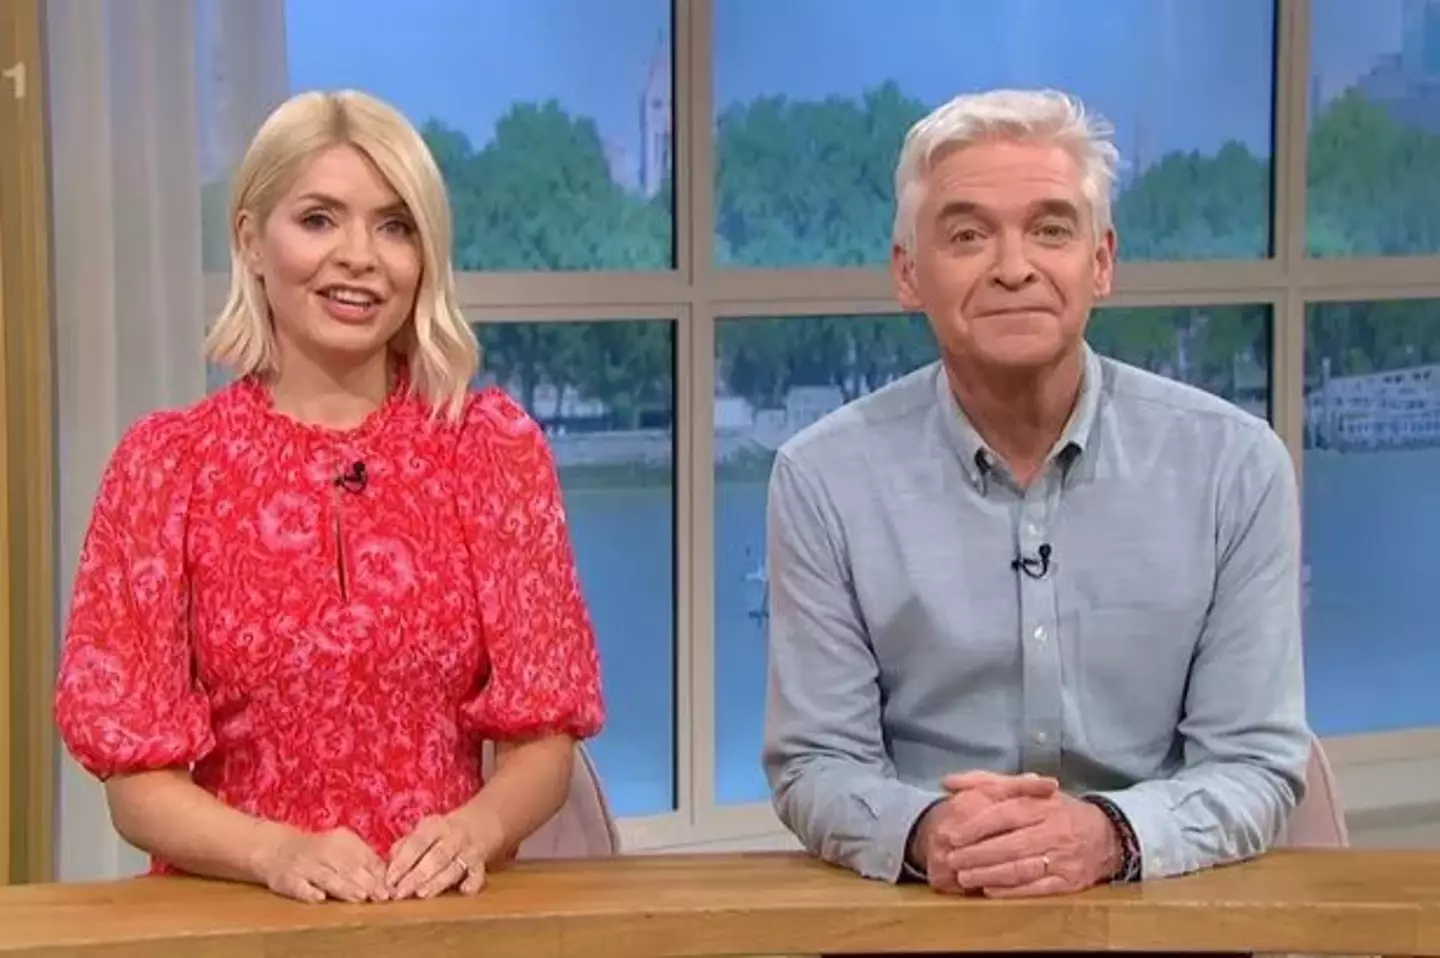 New presenters have been confirmed to be taking Holly and Phil's former positions.